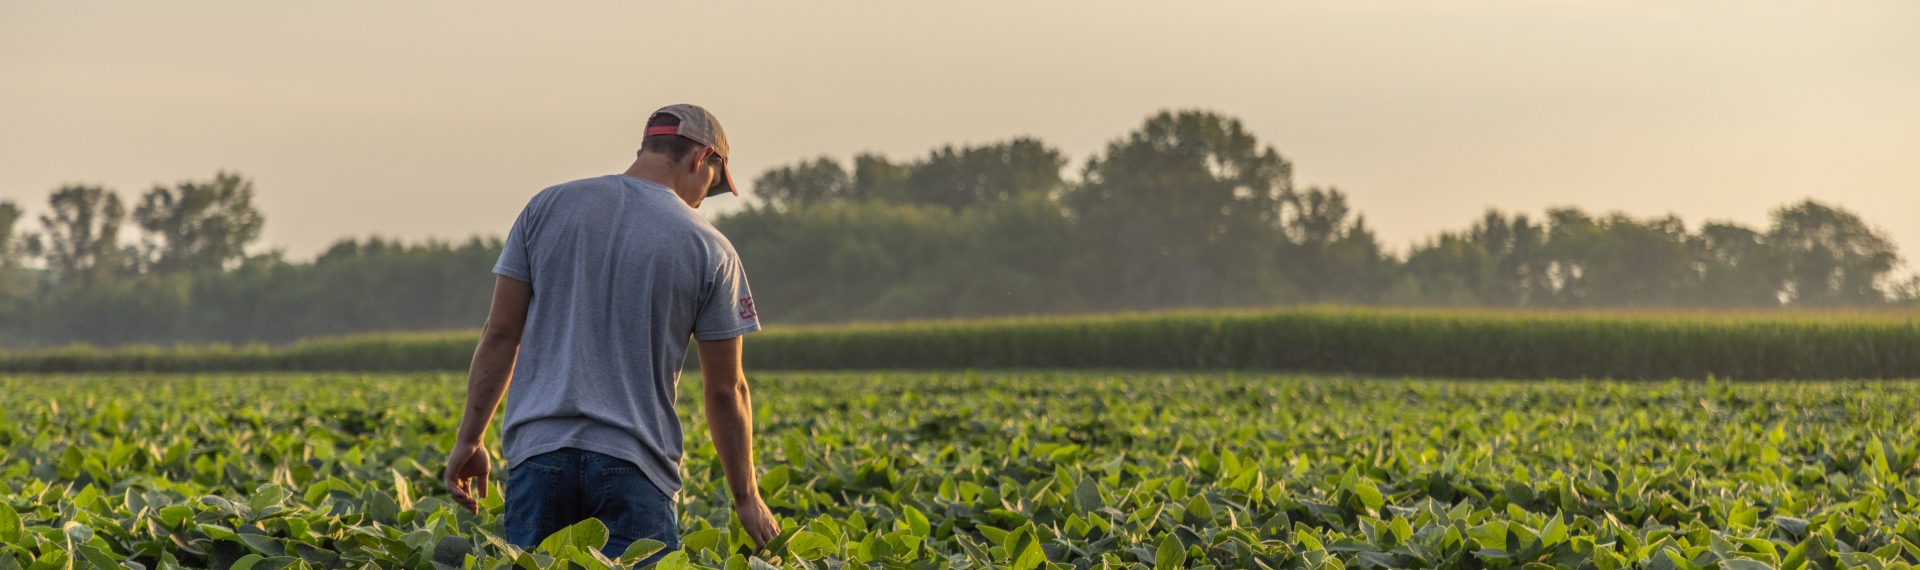 Man inspecting soybeans